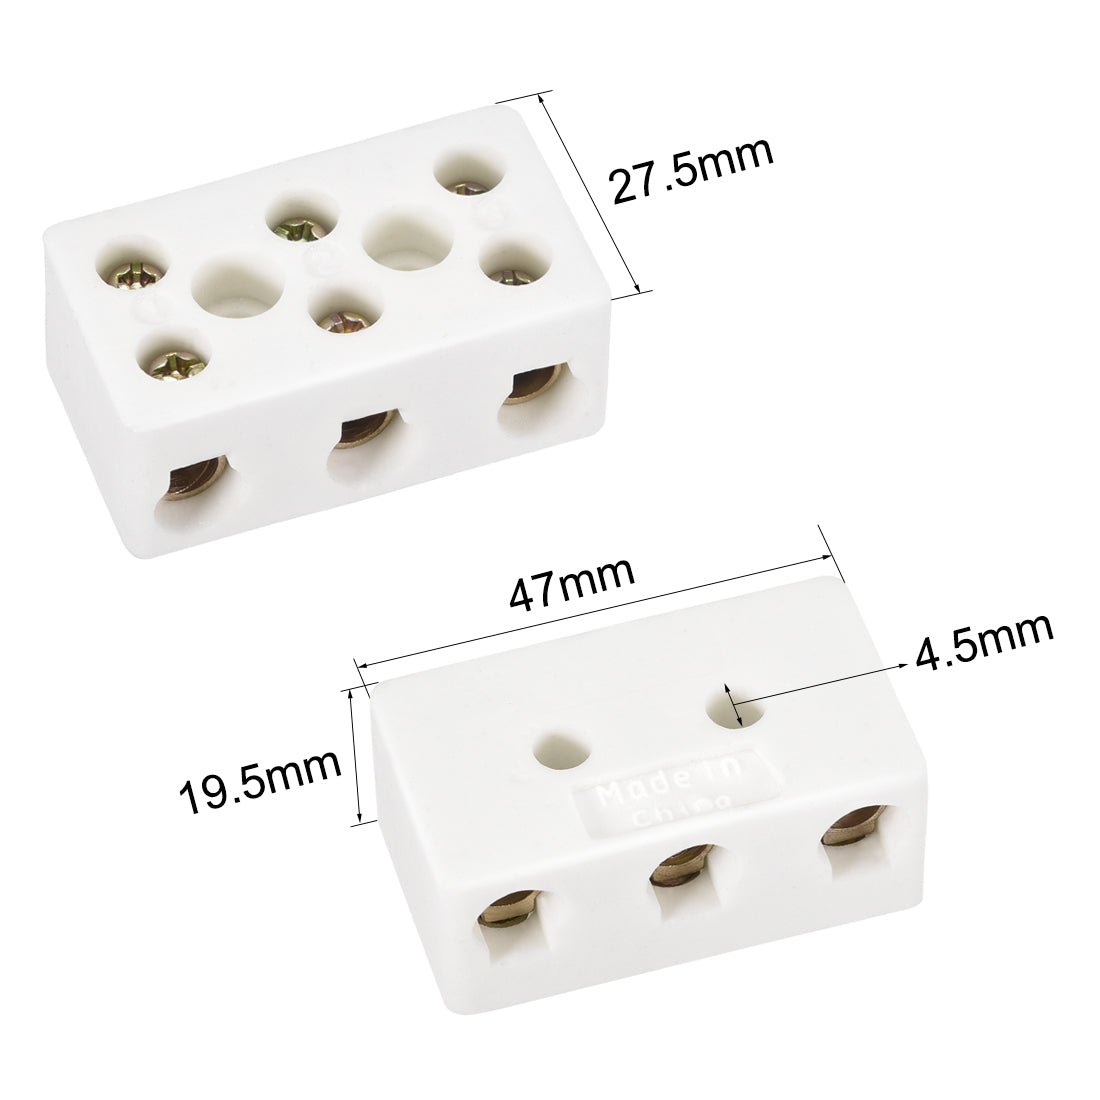 uxcell Uxcell 3 Way Ceramics Terminal Blocks High Temp Porcelain Ceramic Connectors 47x27.5x19.5mm for Electrical Wire Cable 2 Pcs